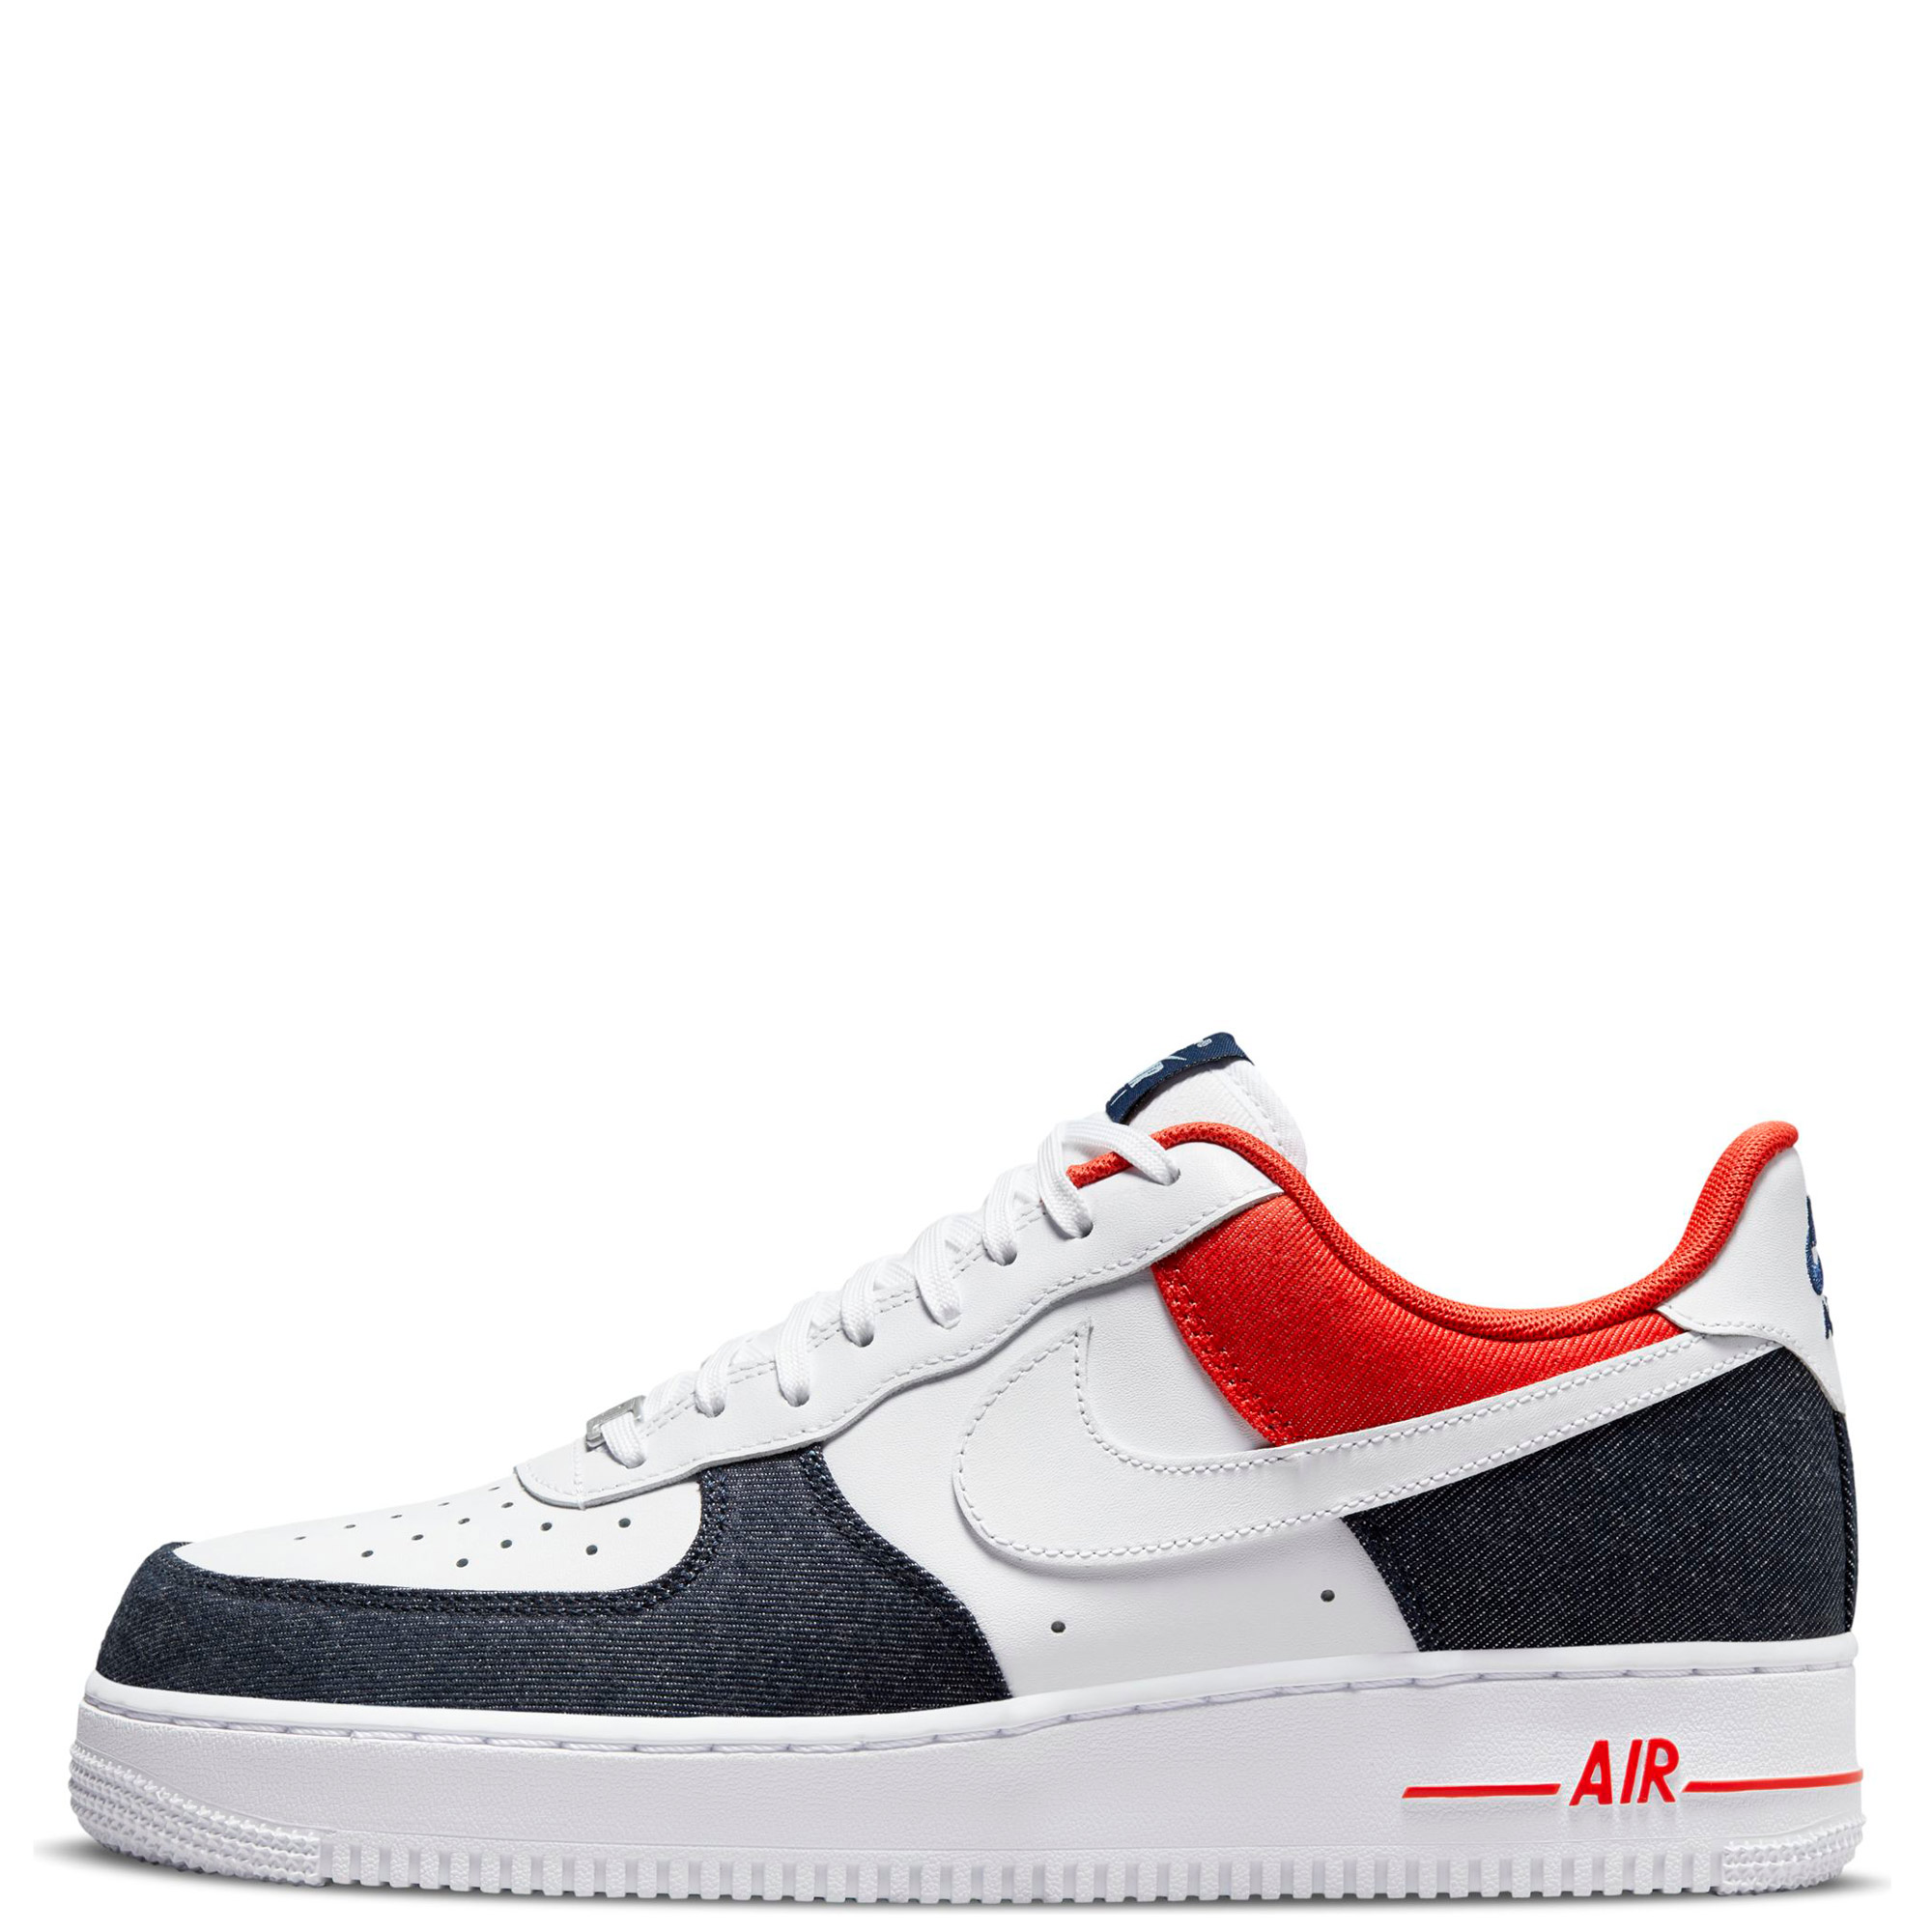 Titolo on X: Nike Air Force 1 High '07 Lv8 Sport NBA Midnight  Navy/University Red-White RELEASE: Thursday, 4th October 9AM CET l i n k ➡️   #nike #af1 #AirForce #AirForceOne #niketalk #